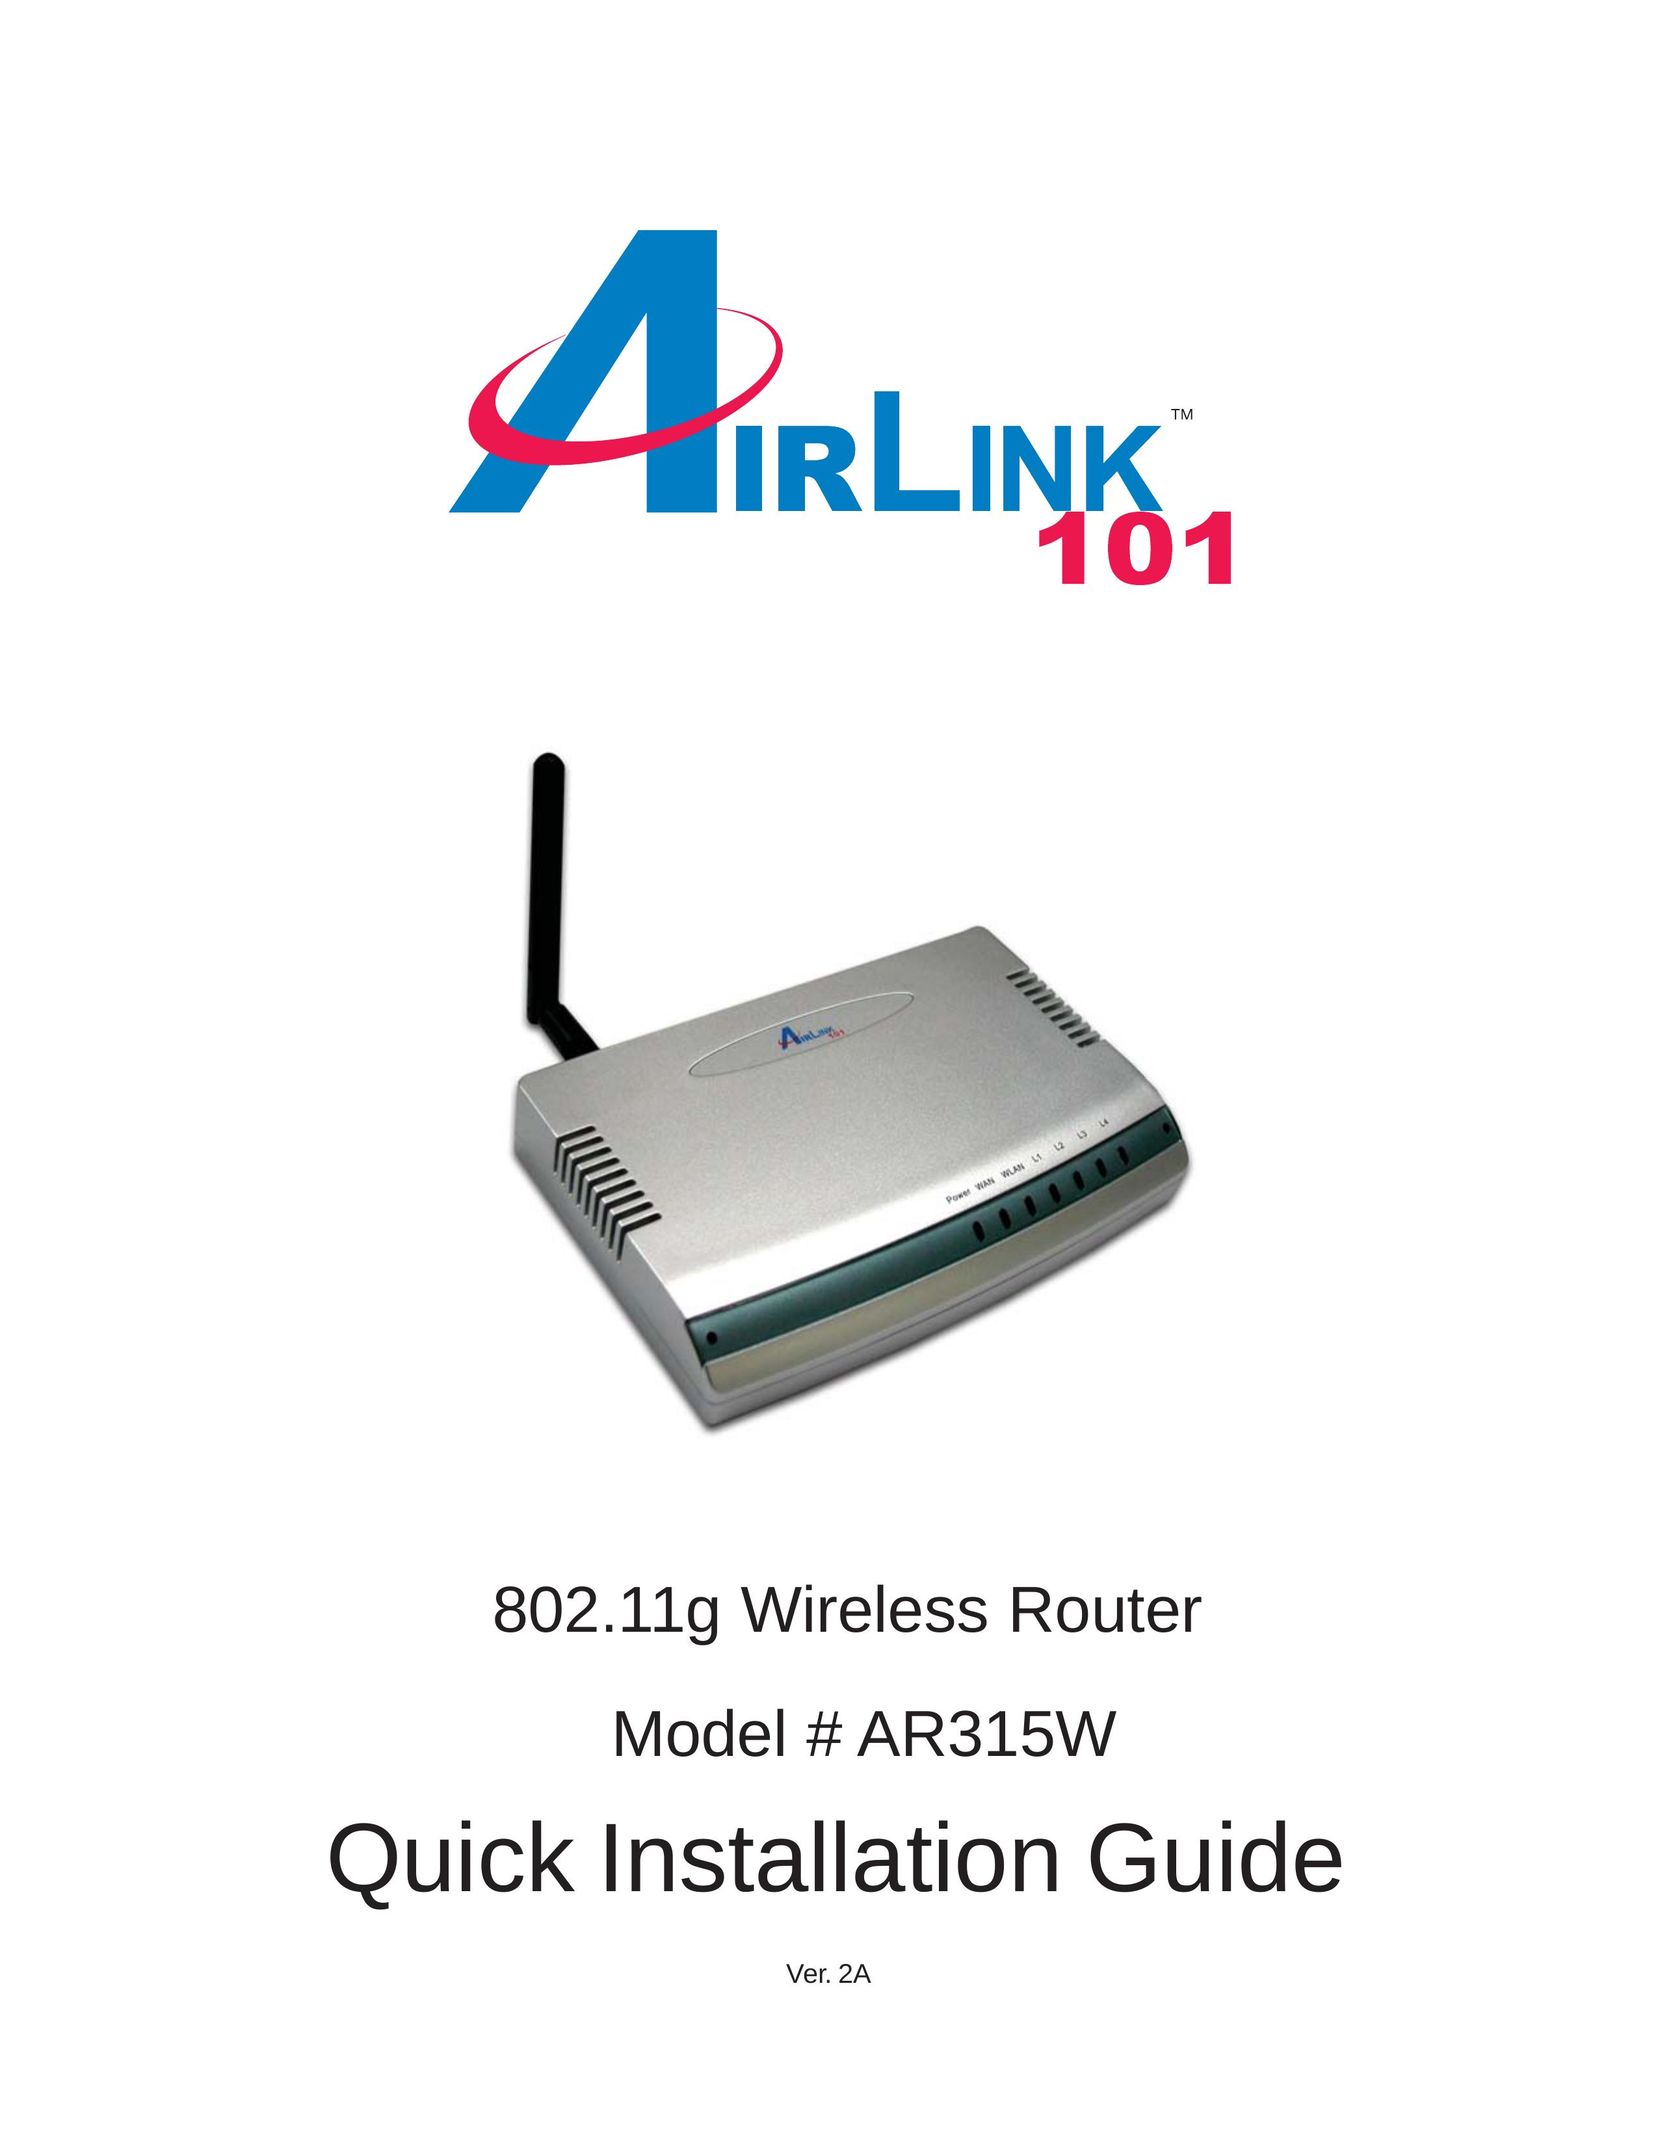 Airlink101 AR315W Network Router User Manual